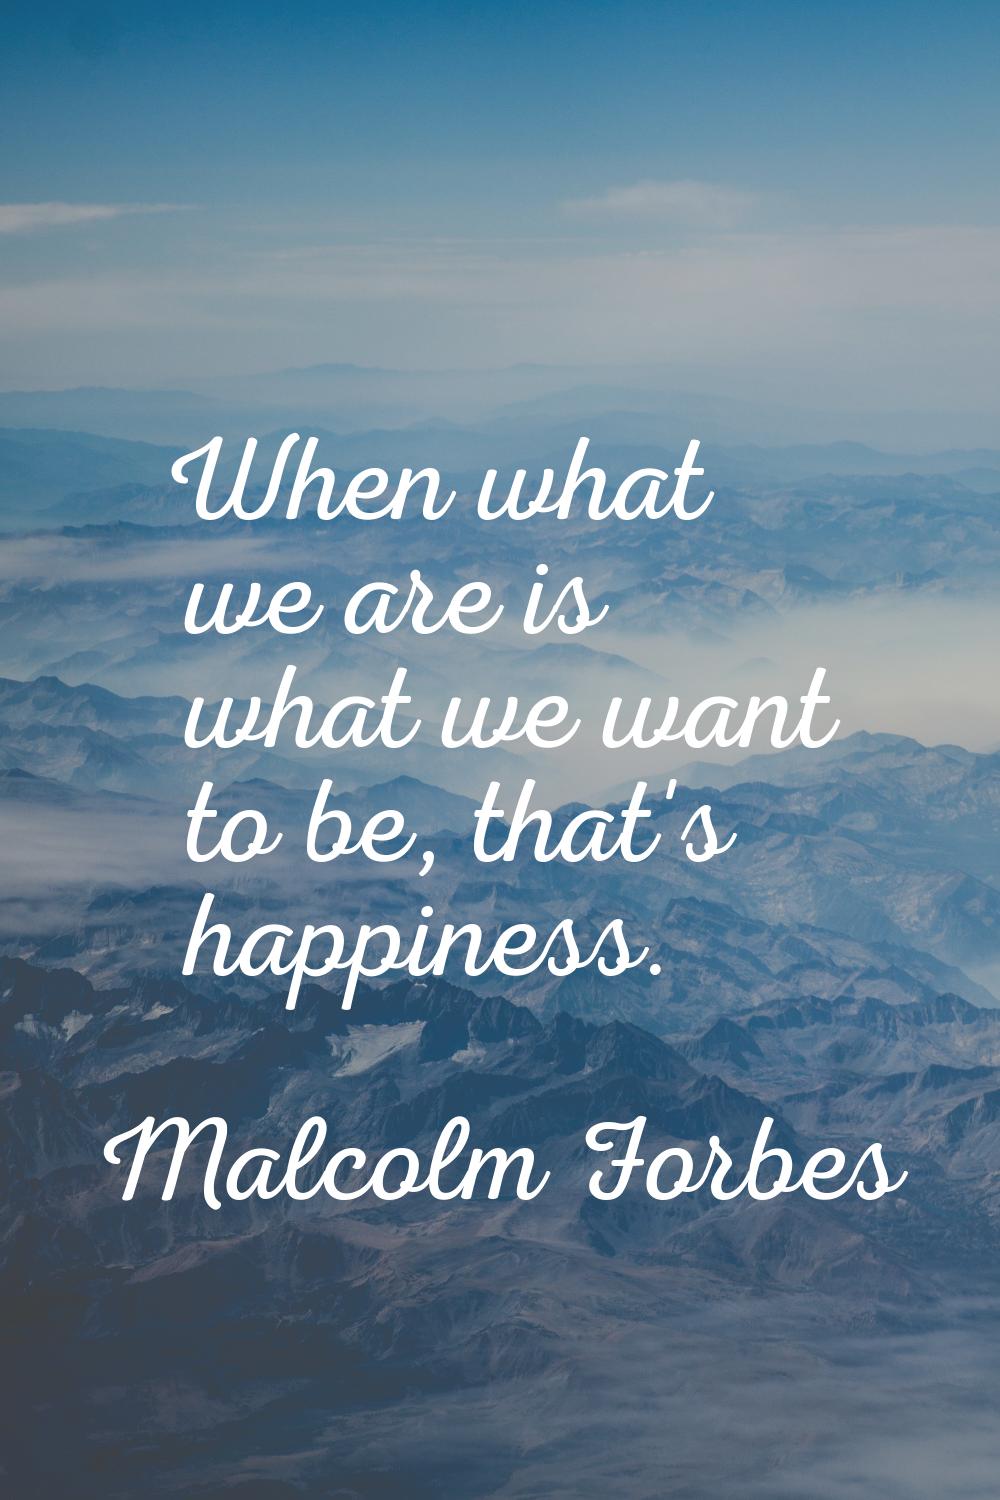 When what we are is what we want to be, that's happiness.